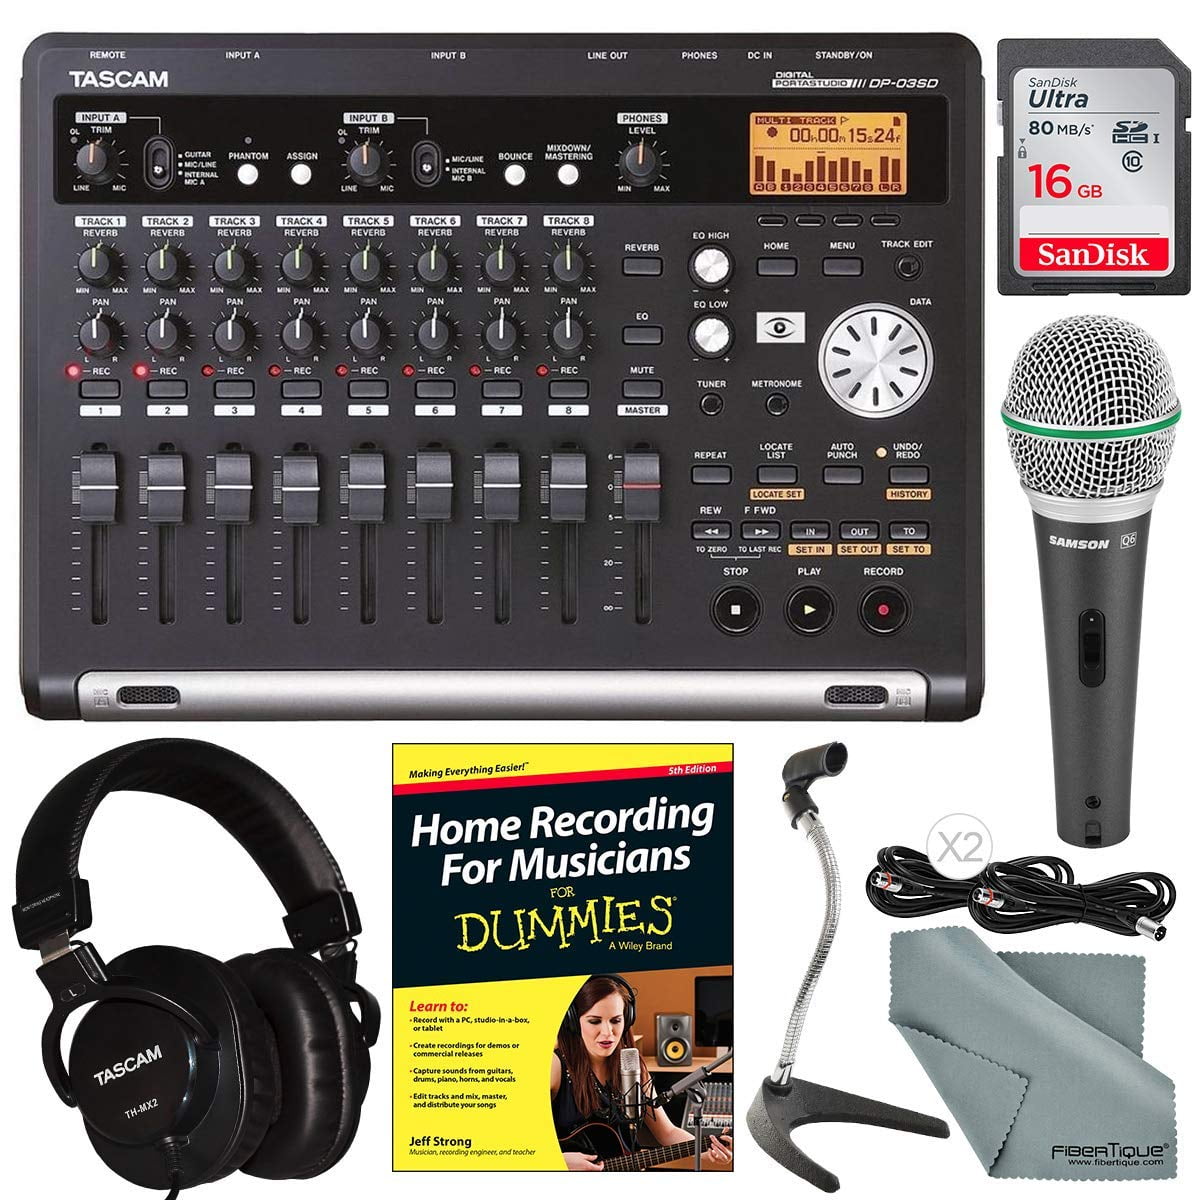 Tascam DP-03SD 8-Track Digital Recorder Bundle with Home Recording for Musicians Guide 16 GB FiberTique Cloth and More Handheld Mic 